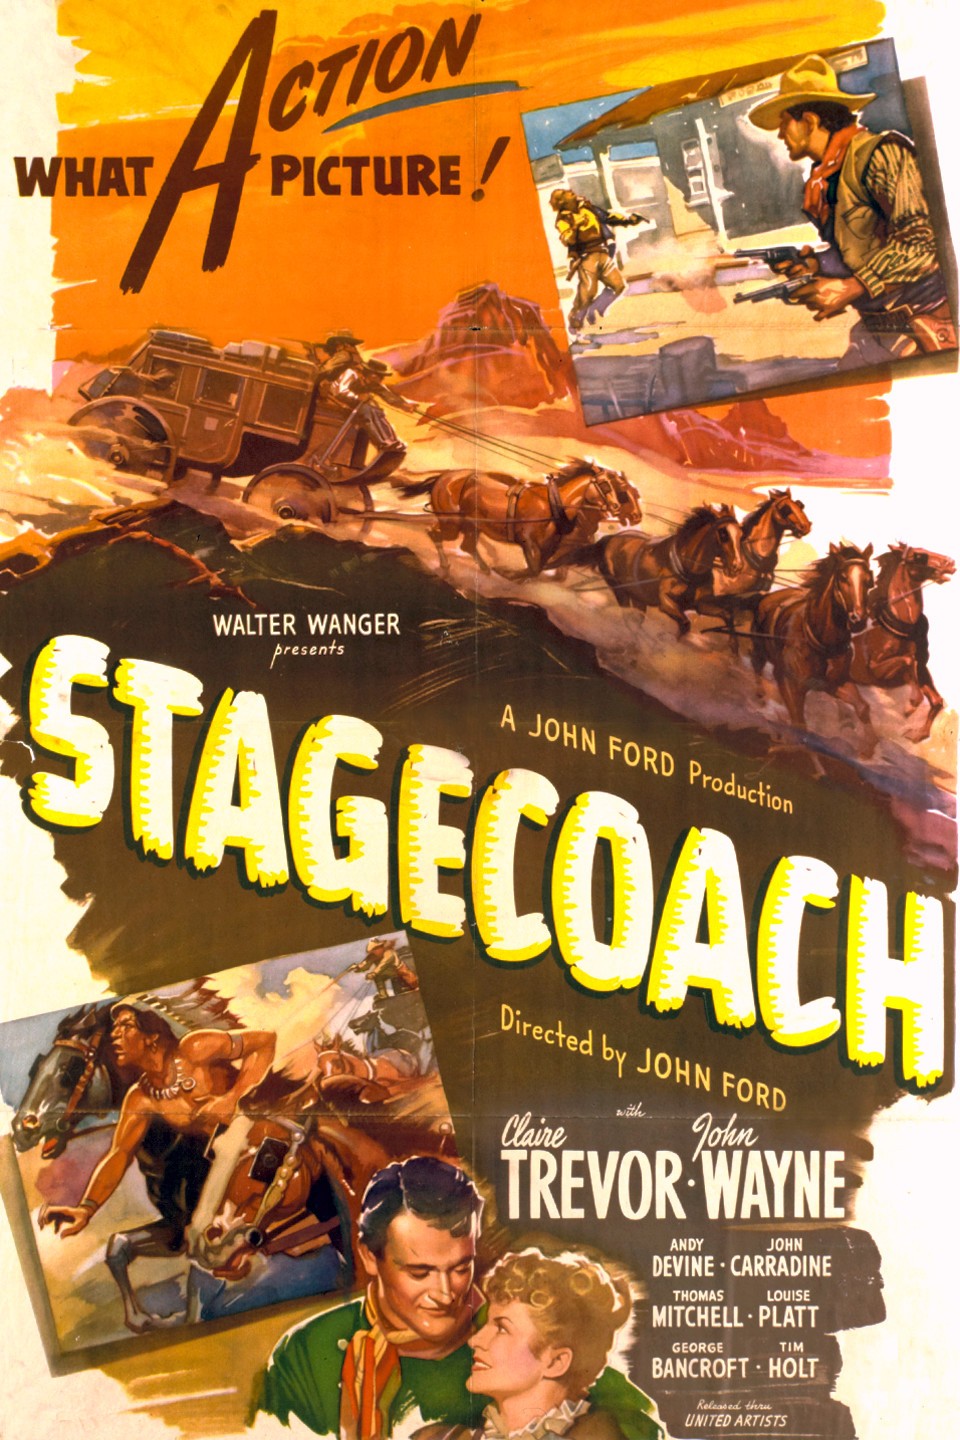 Best Actor: Best Supporting Actor 1939: Thomas Mitchell in Stagecoach